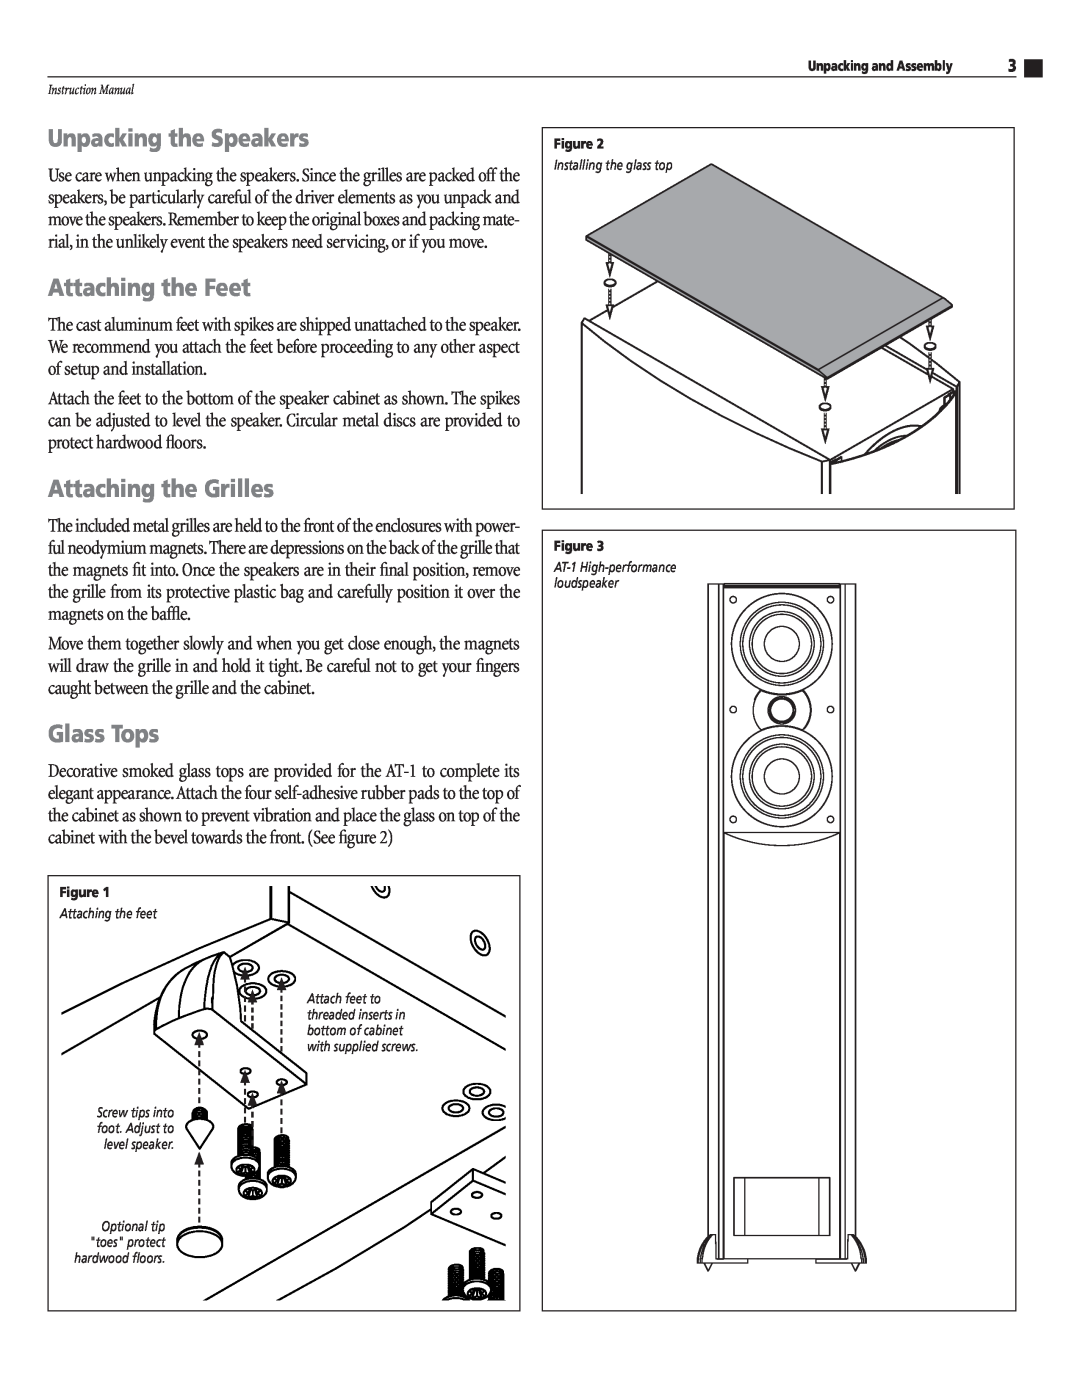 Atlantic Technology AT-1 instruction manual Unpacking the Speakers, Attaching the Feet, Attaching the Grilles, Glass Tops 